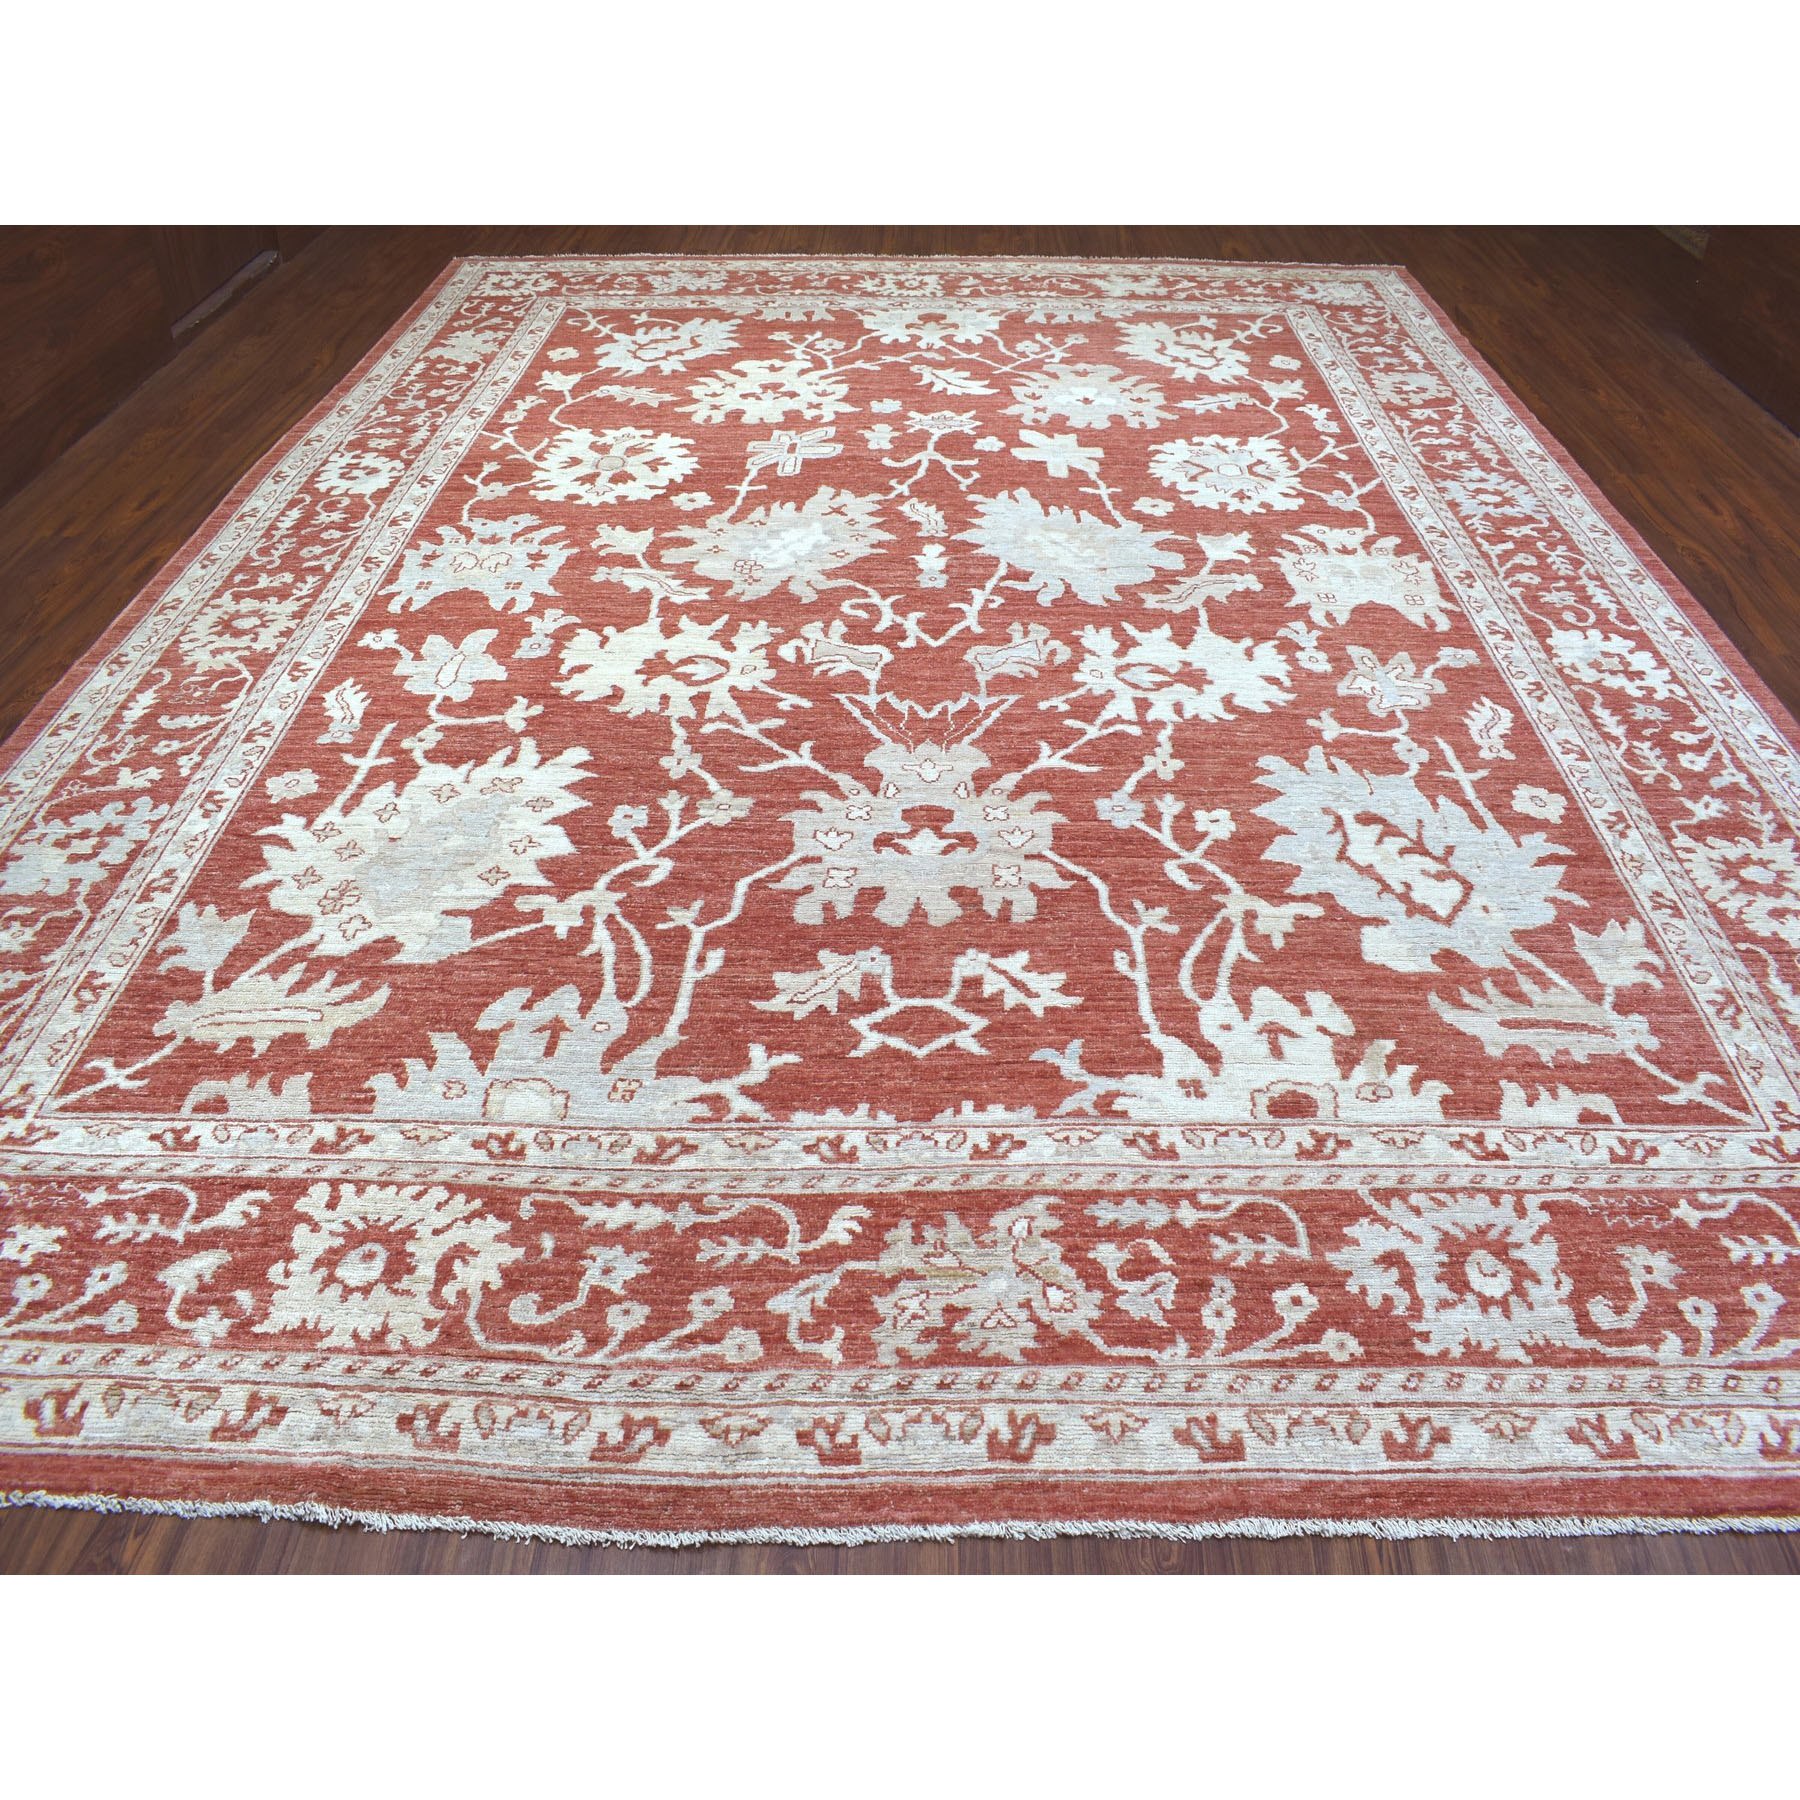 11'9"x14'9" Angora Oushak with Floral All Over Design Hand Woven Brick Red Soft Afghan Wool Oriental Oversized Rug 